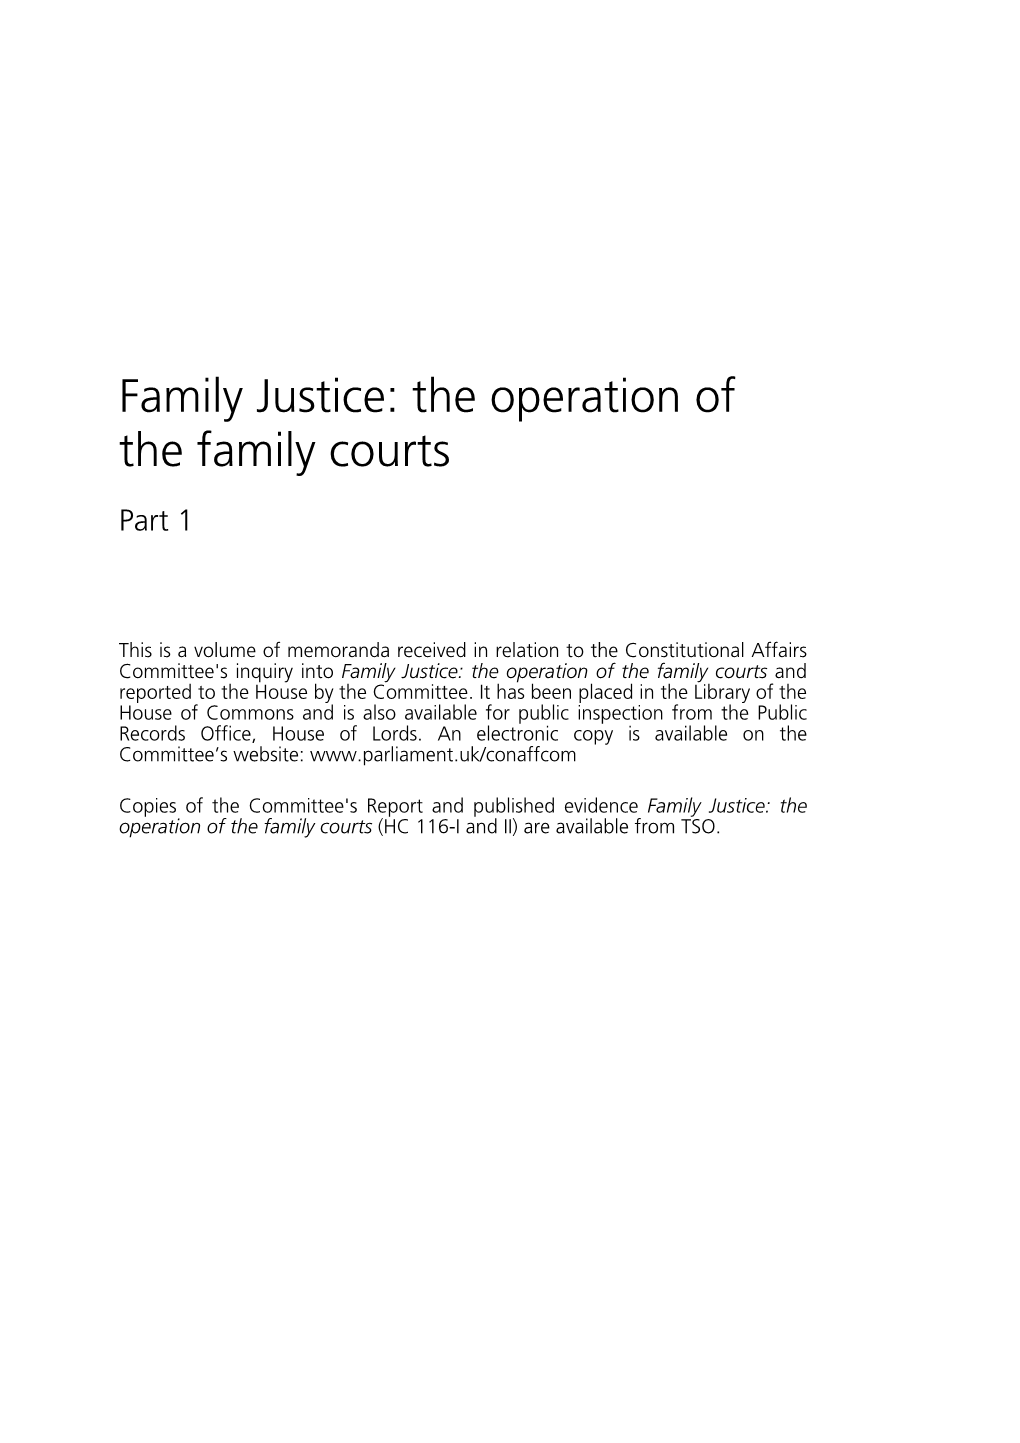 Family Justice: the Operation of the Family Courts